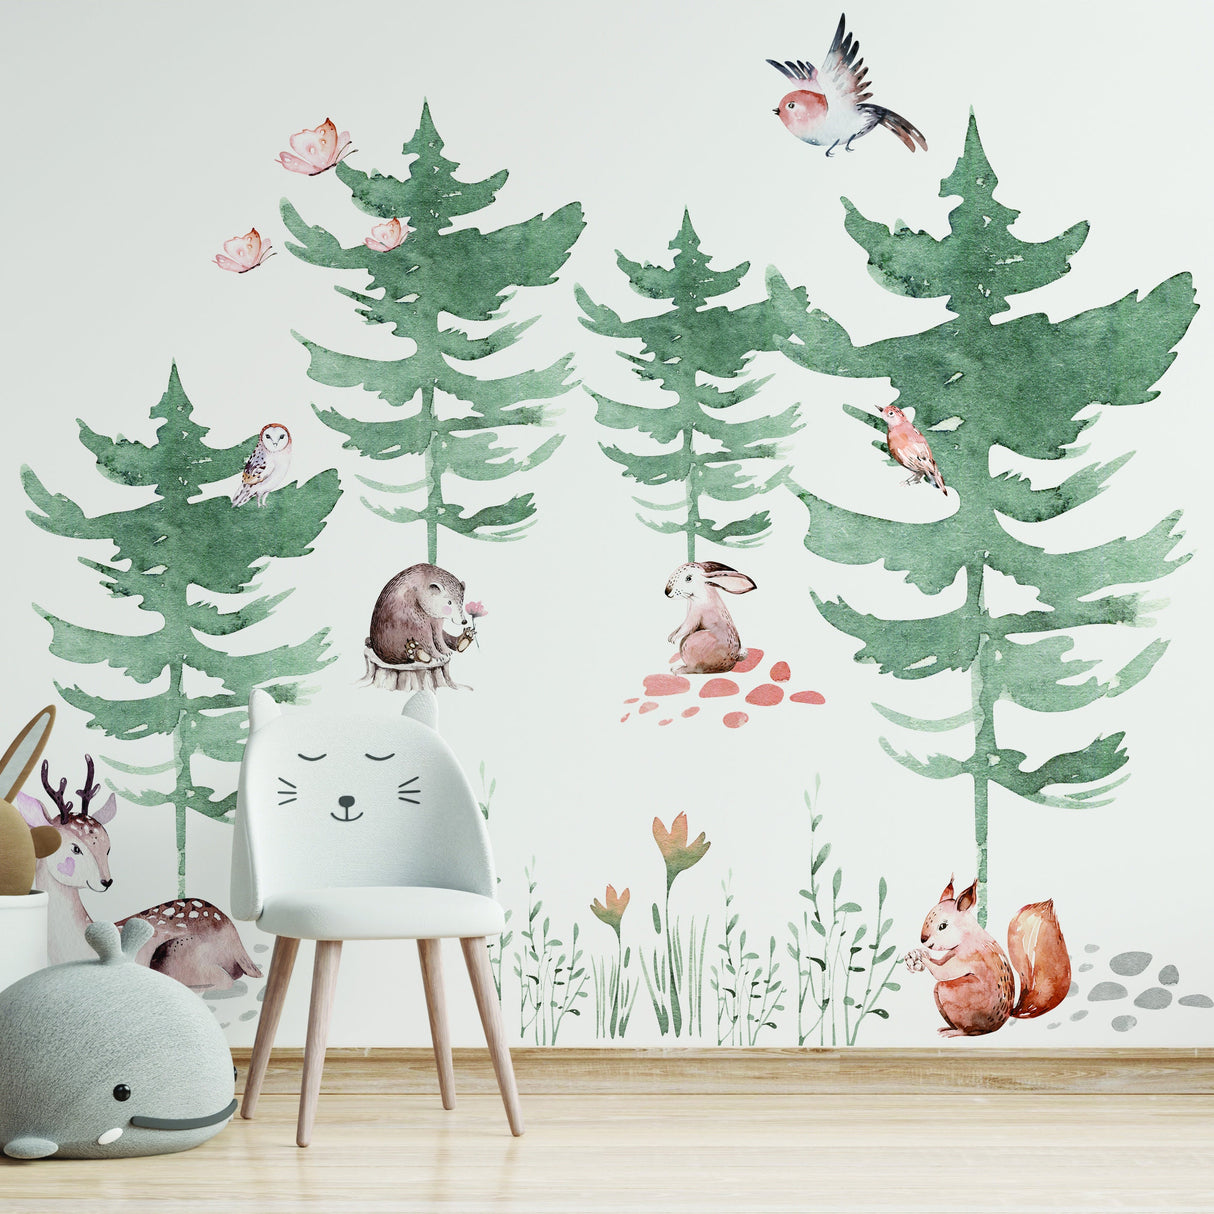 Woodland Wonders Vinyl Wall Decal Set - Whimsical Animal & Forest Theme Stickers